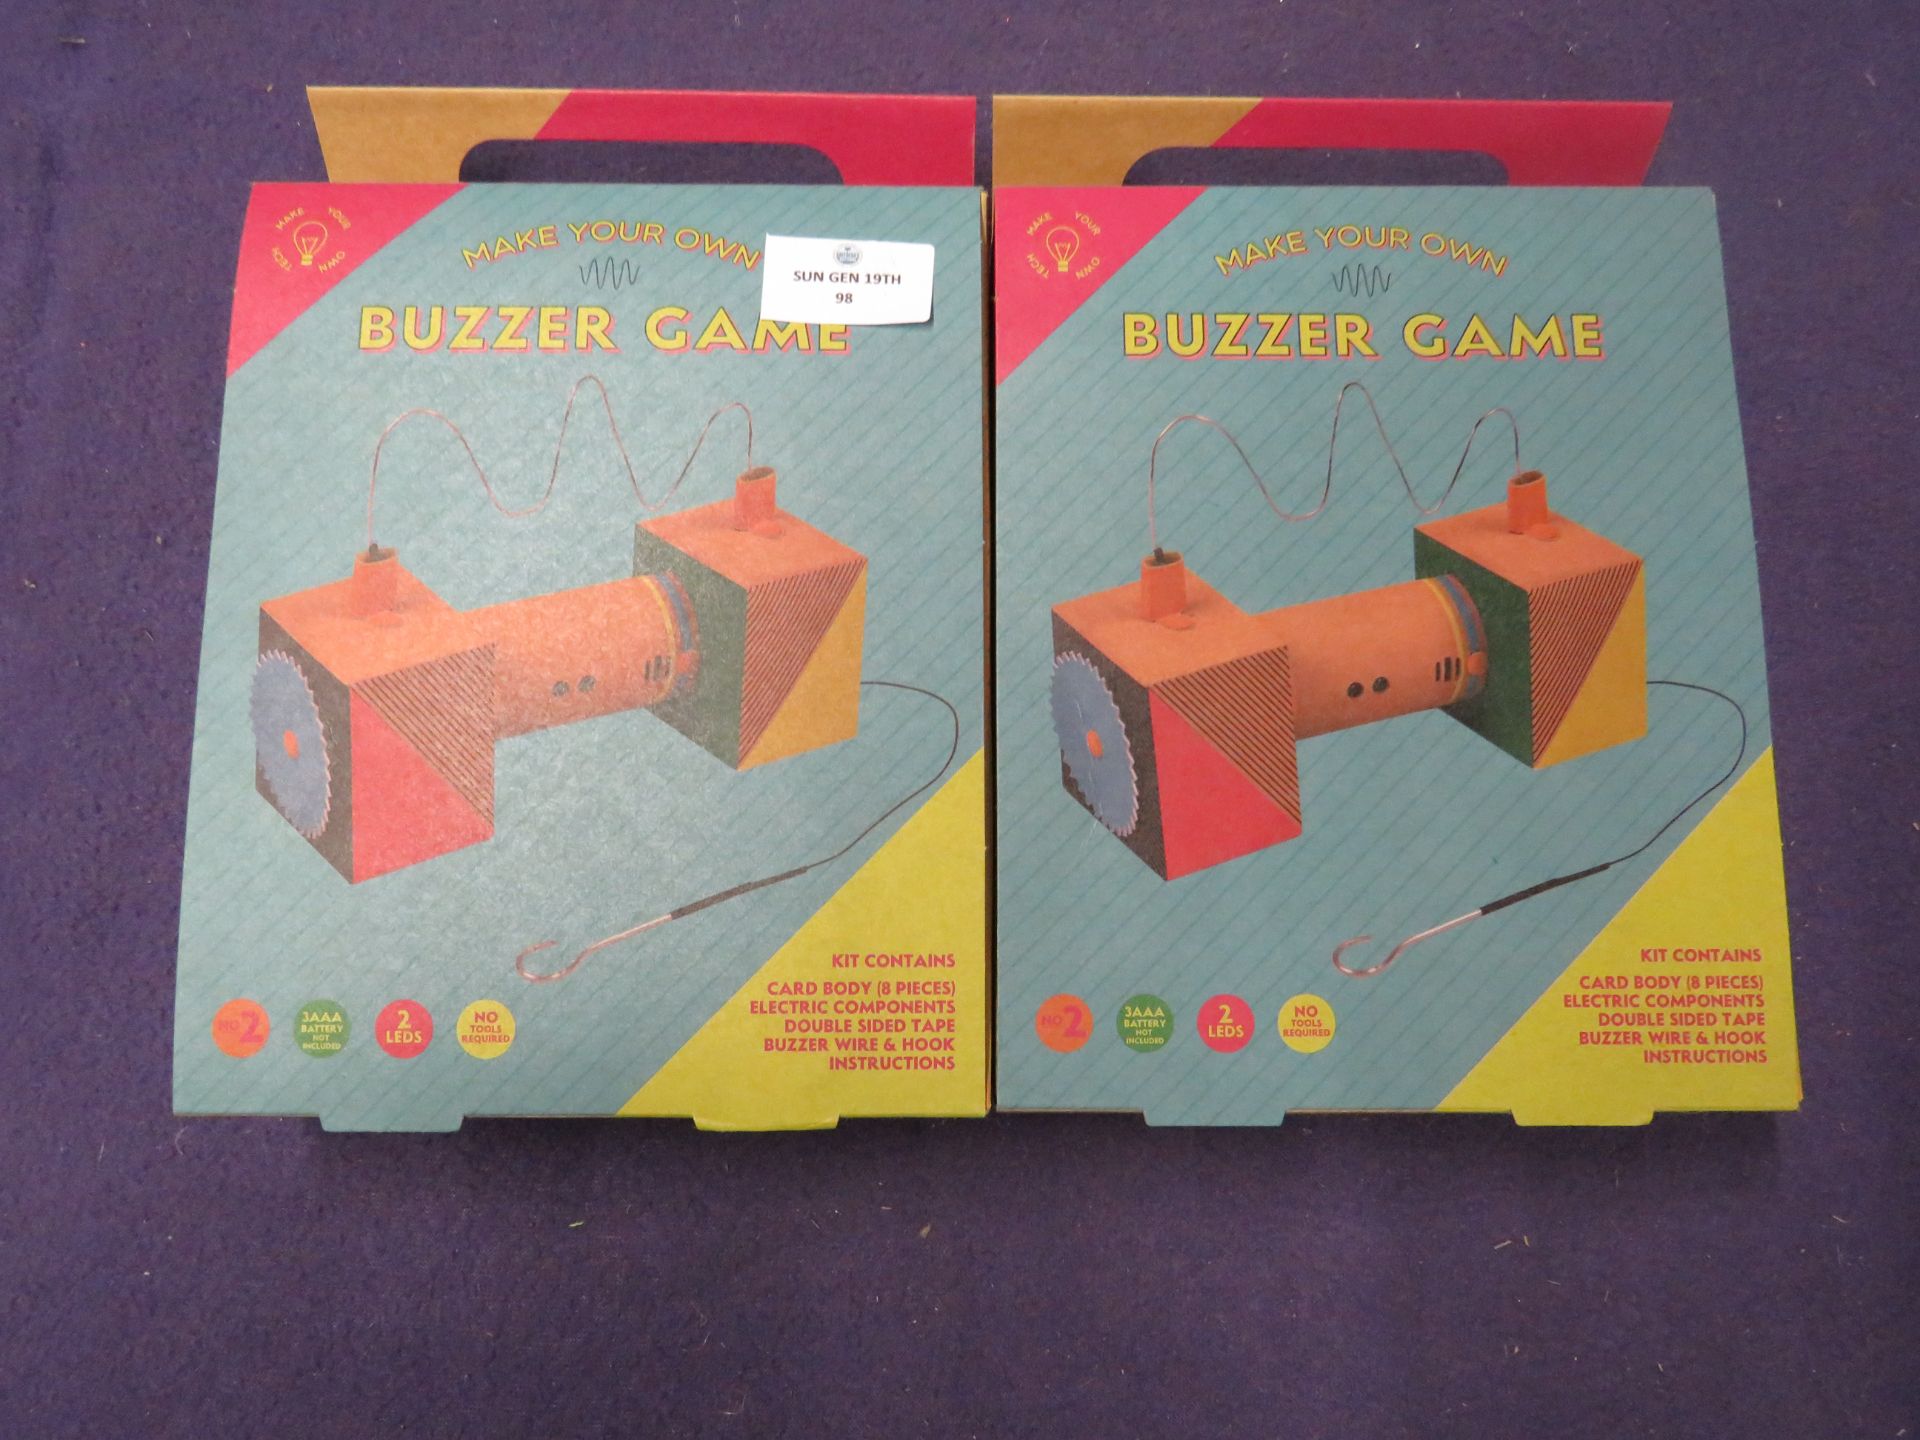 2x Make Your Own Tech - Make Your Own Buzzer Game - Unused & Boxed.